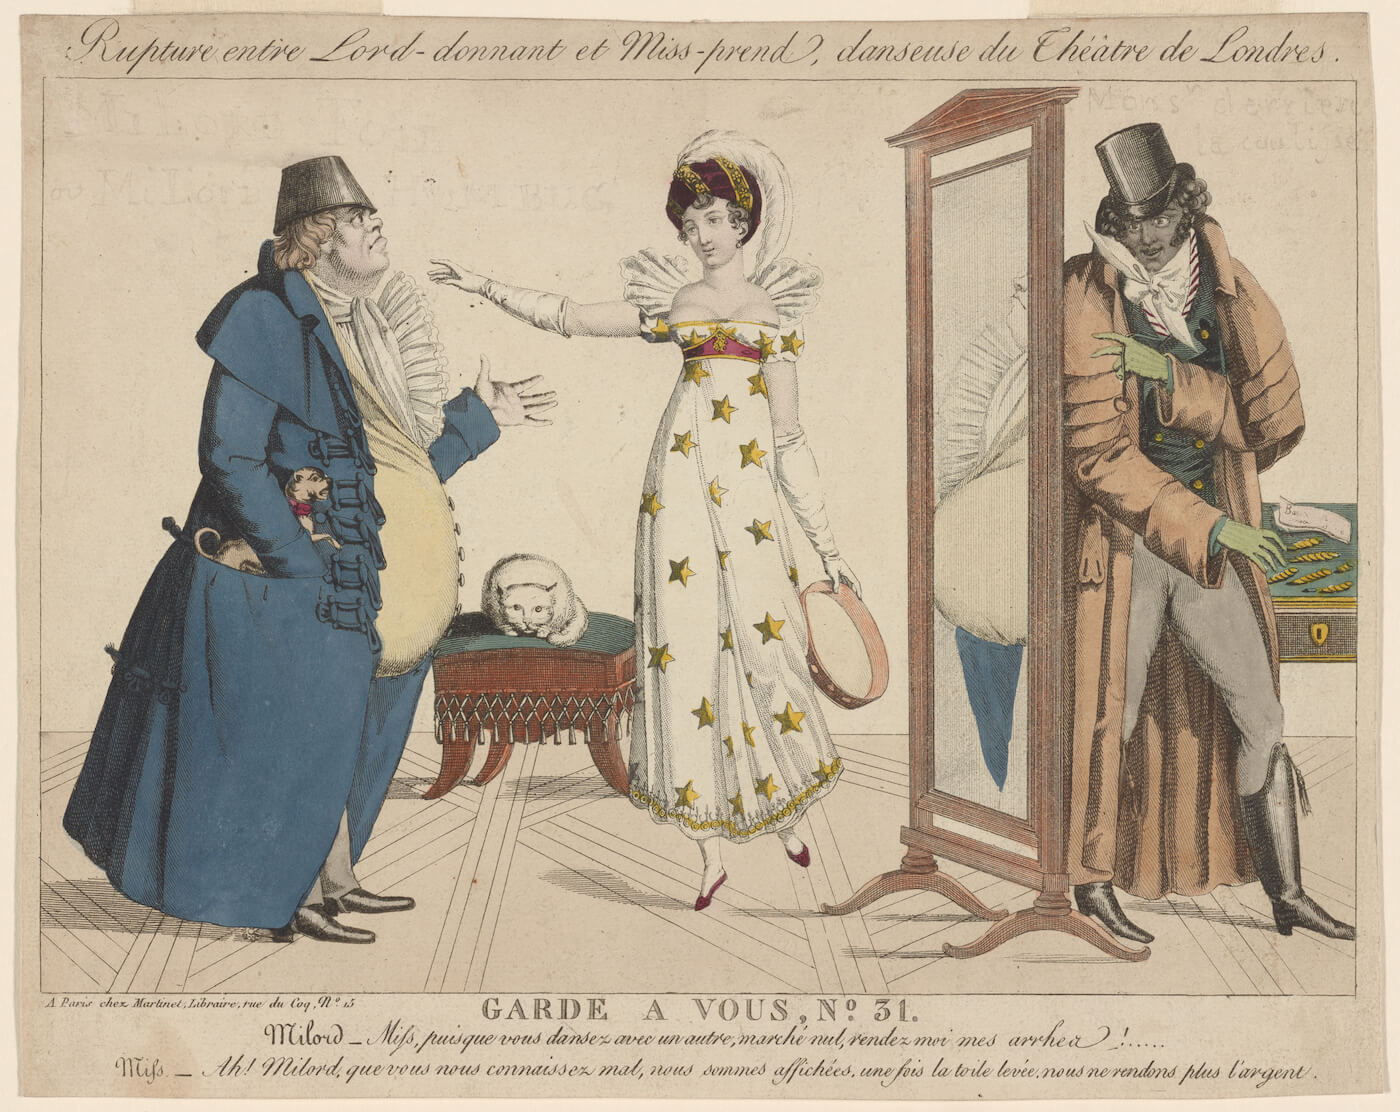 Public domain image of theatrical people looking in mirror